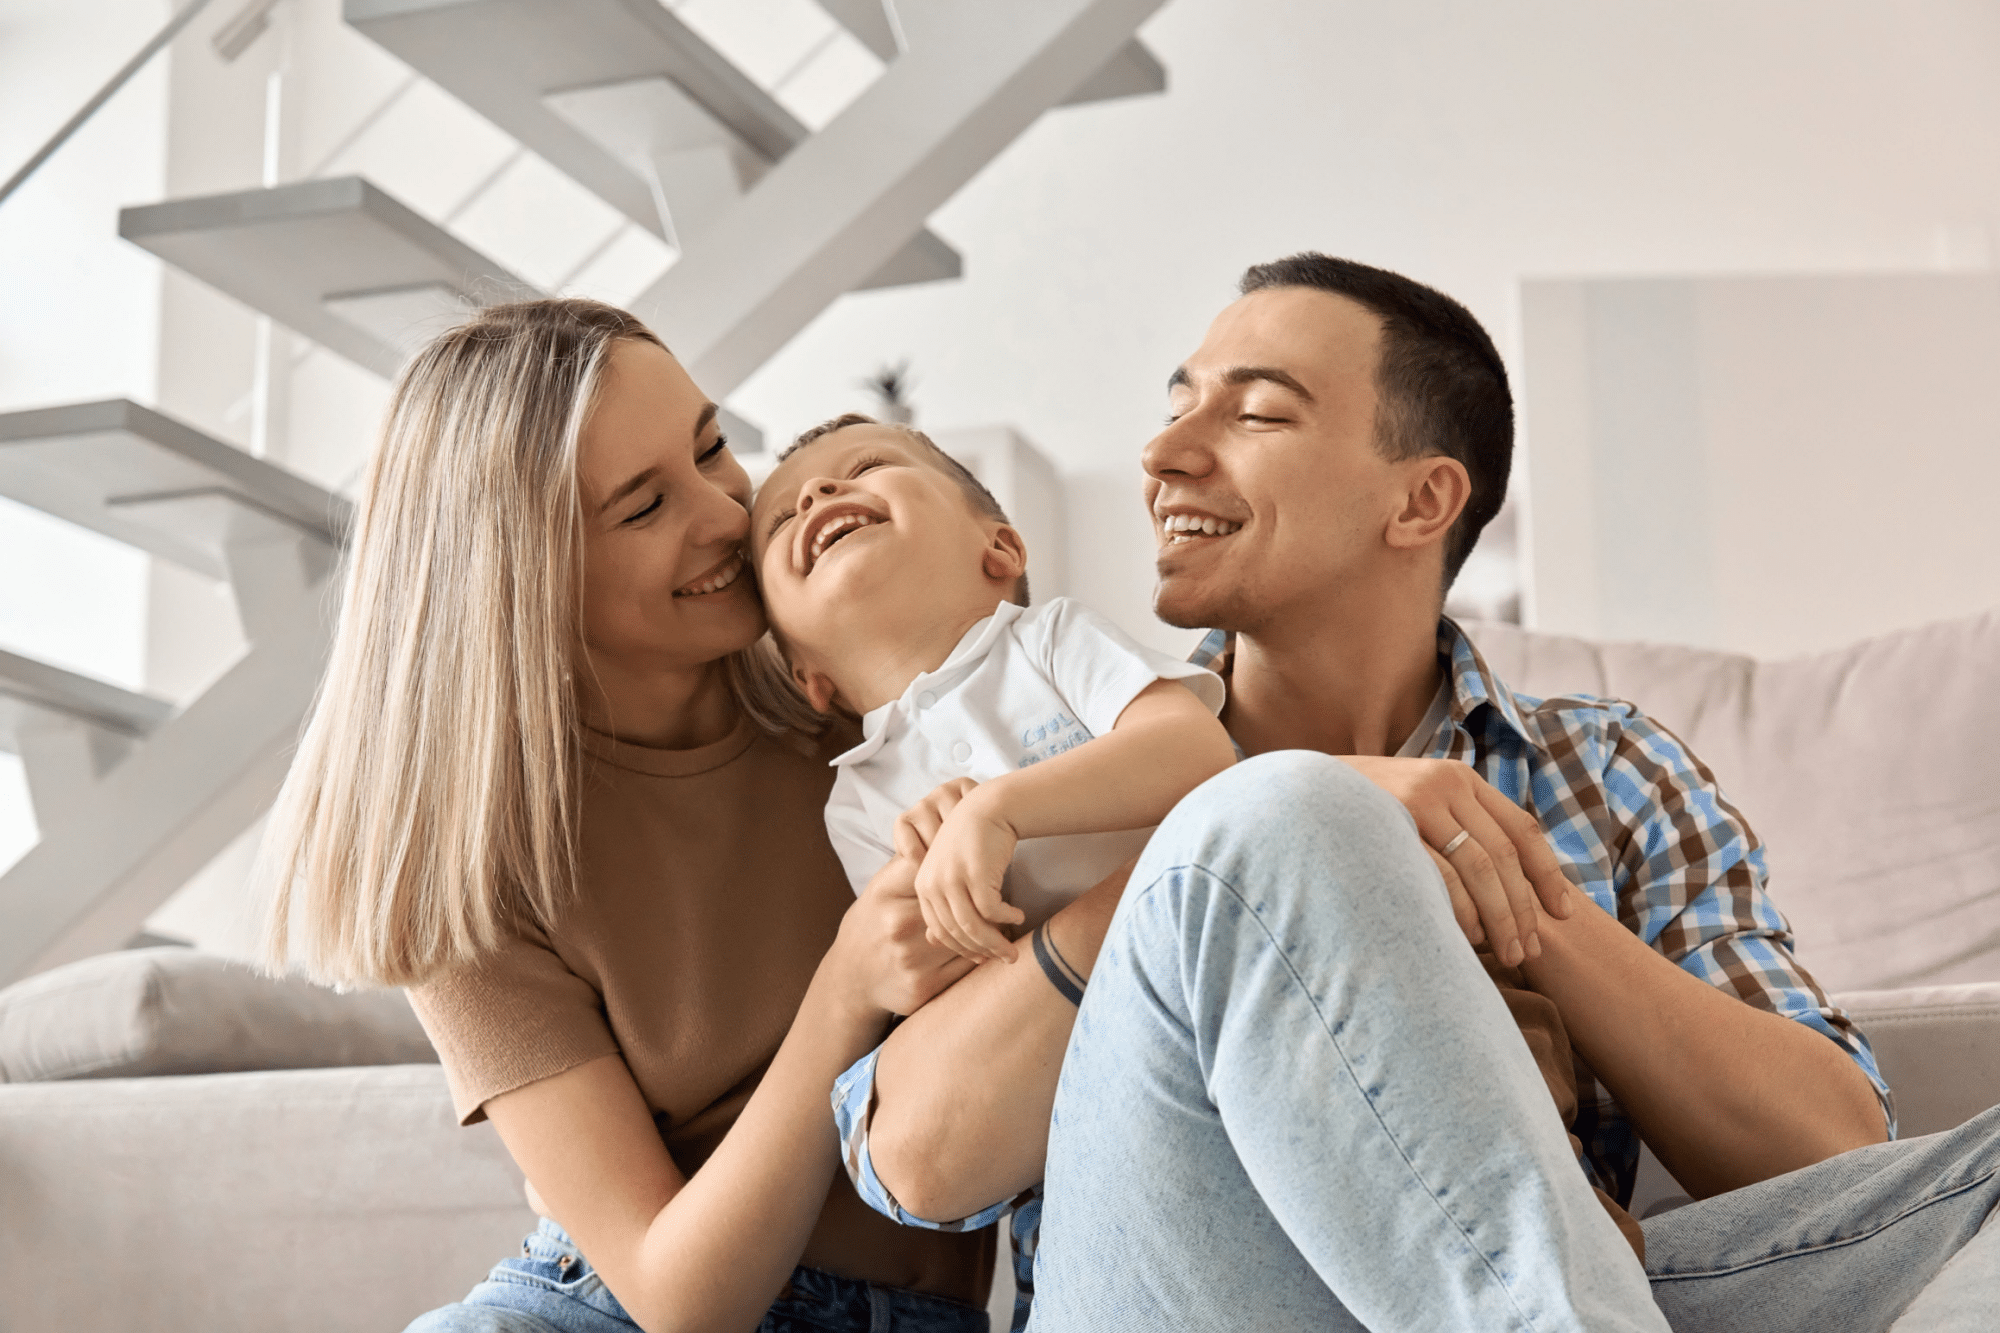 The Importance of Having a Family Dentist Family Dentist in New Braunfels Family Dentist in New Braunfels. HCD. clear aligners, implants, sleep apnea, emergency dentistry in New Braunfels TX 78132. 830-626-1002